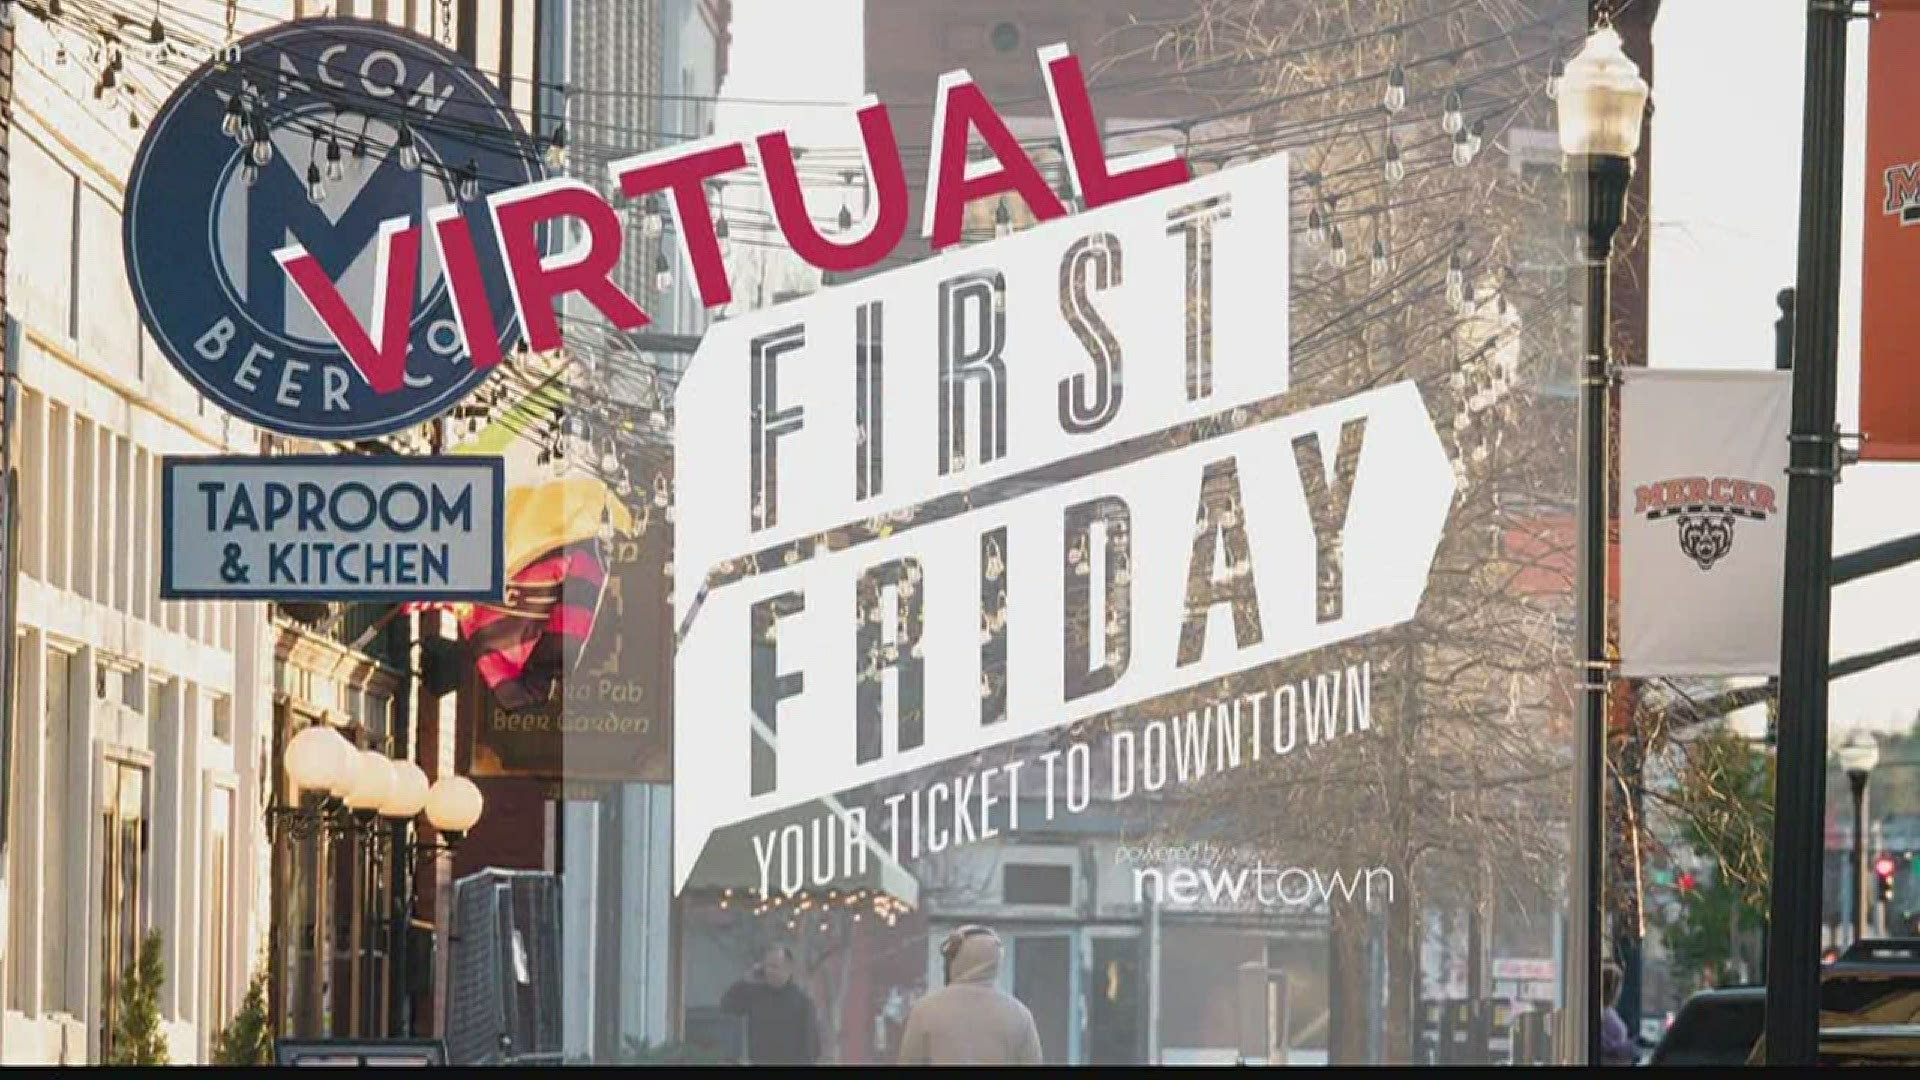 NewTown Macon is collaborating with local restaurants and businesses to host a virtual First Friday on May 1.